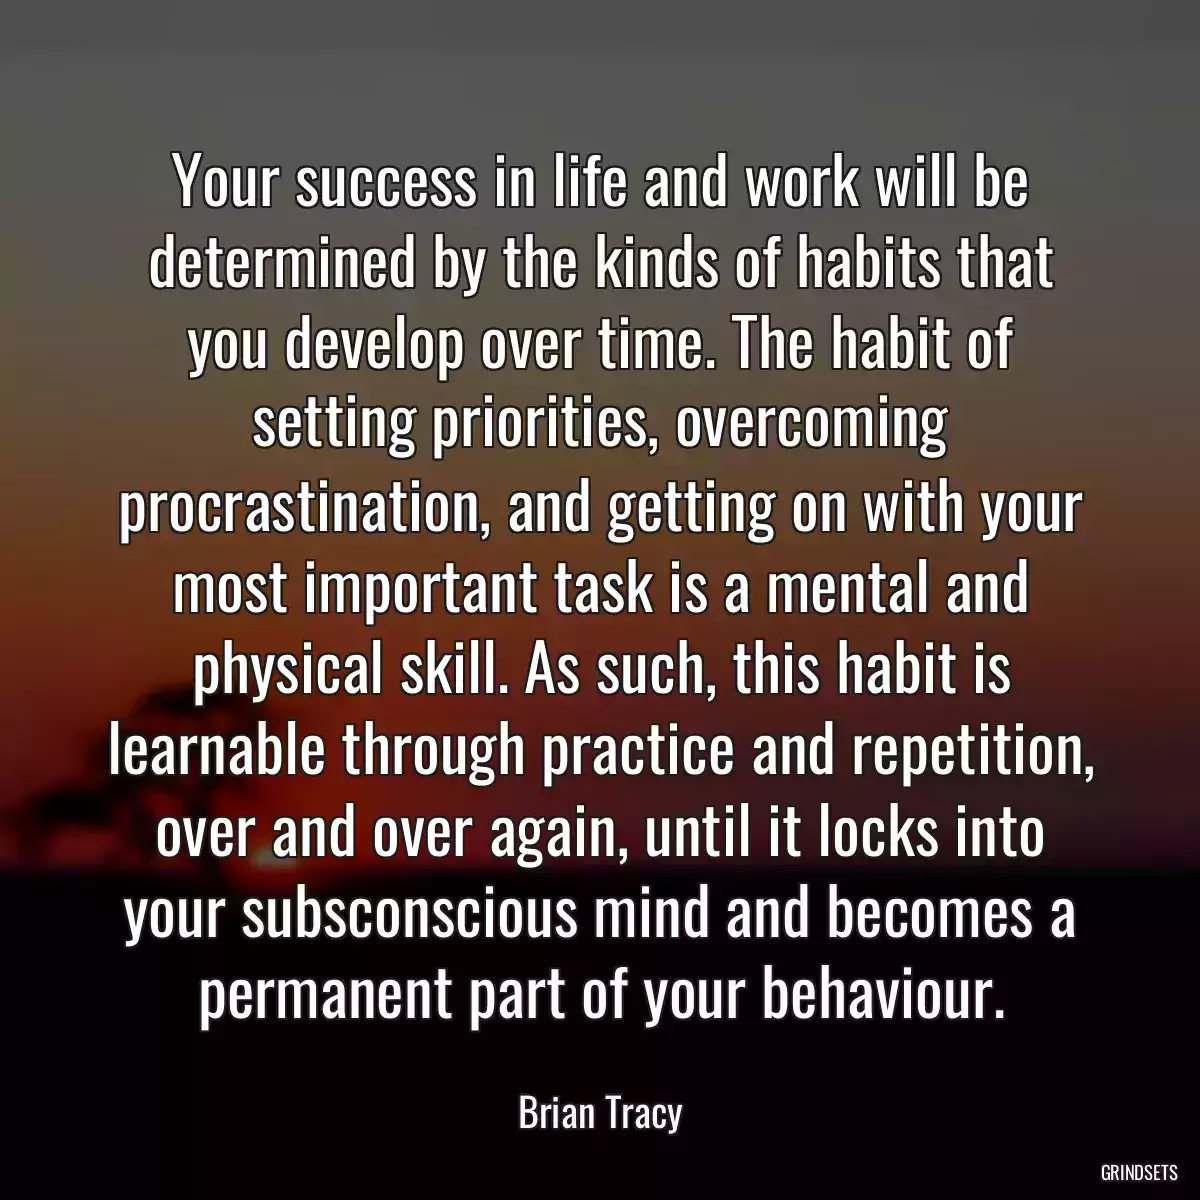 Your success in life and work will be determined by the kinds of habits that you develop over time. The habit of setting priorities, overcoming procrastination, and getting on with your most important task is a mental and physical skill. As such, this habit is learnable through practice and repetition, over and over again, until it locks into your subsconscious mind and becomes a permanent part of your behaviour.